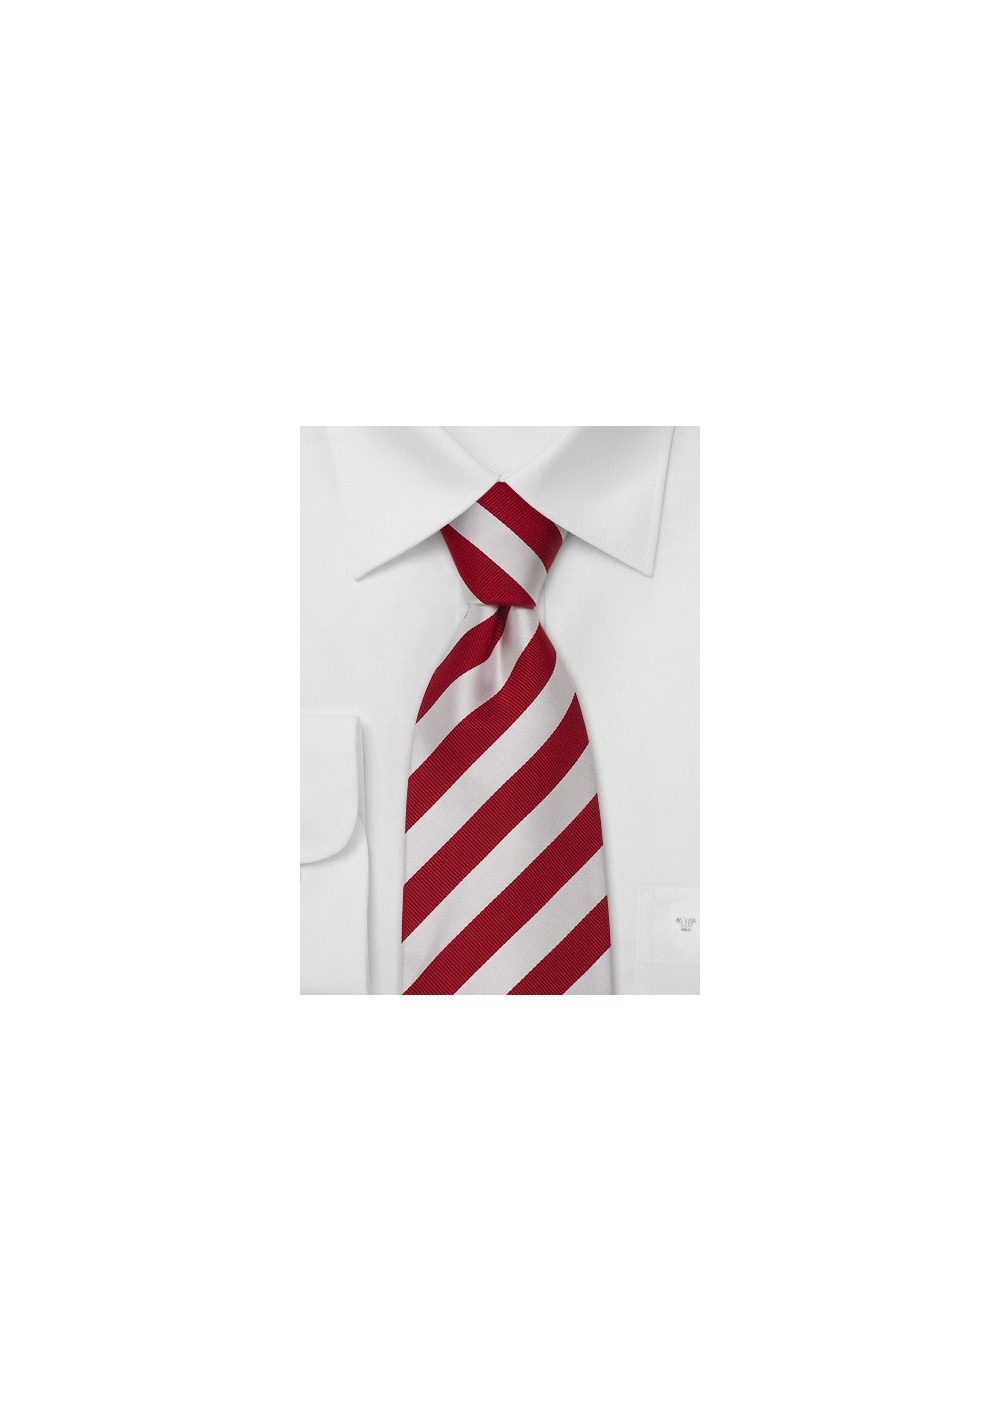 Striped Extra Long Neckties - Striped Tie "Identity" by Parsley